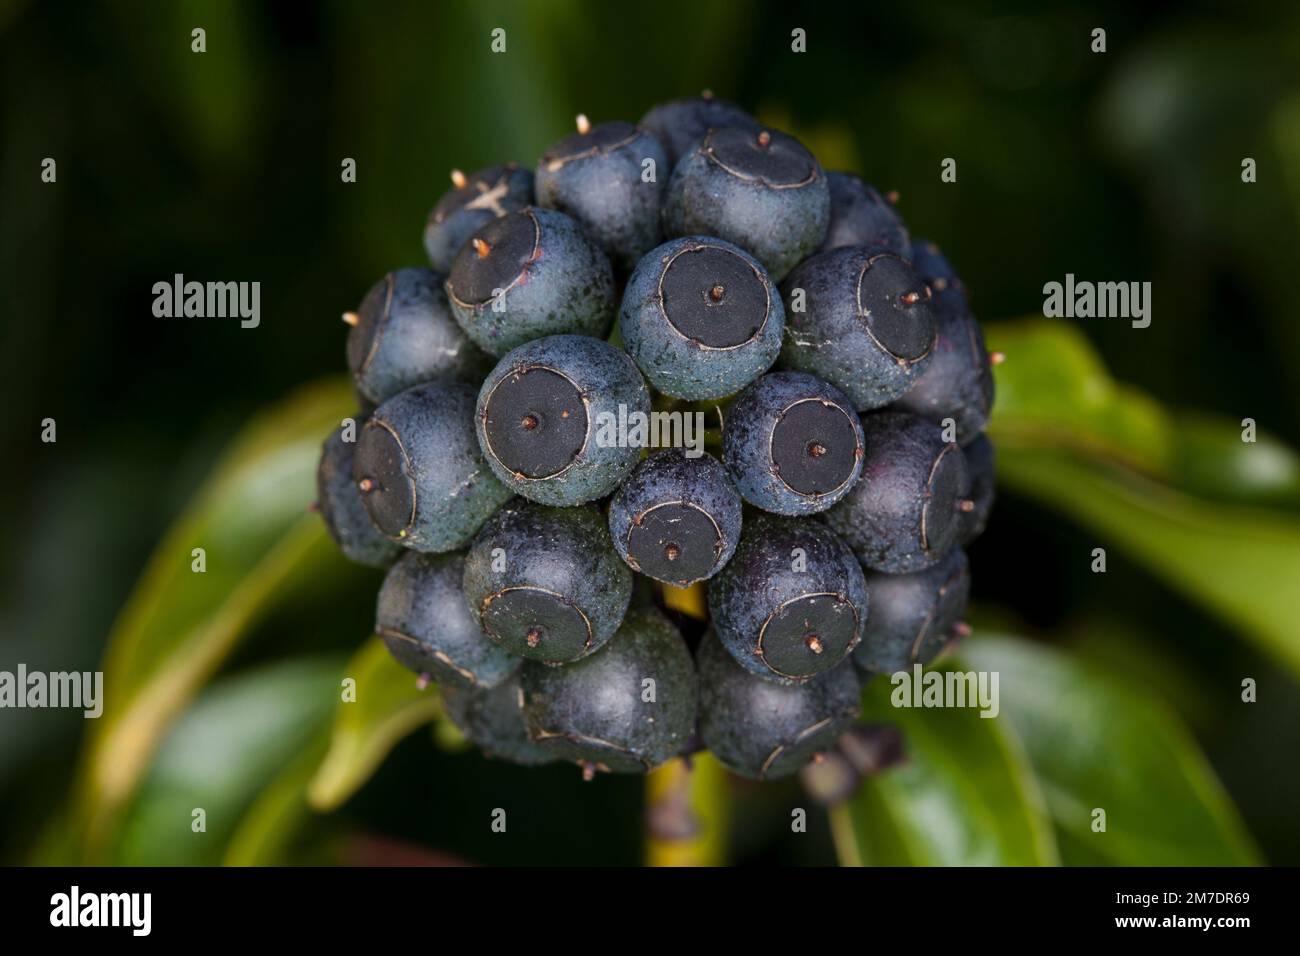 Close up picture of the seed head of an ivy plant shwoing the umble of clustered black berry like fruits. Stock Photo